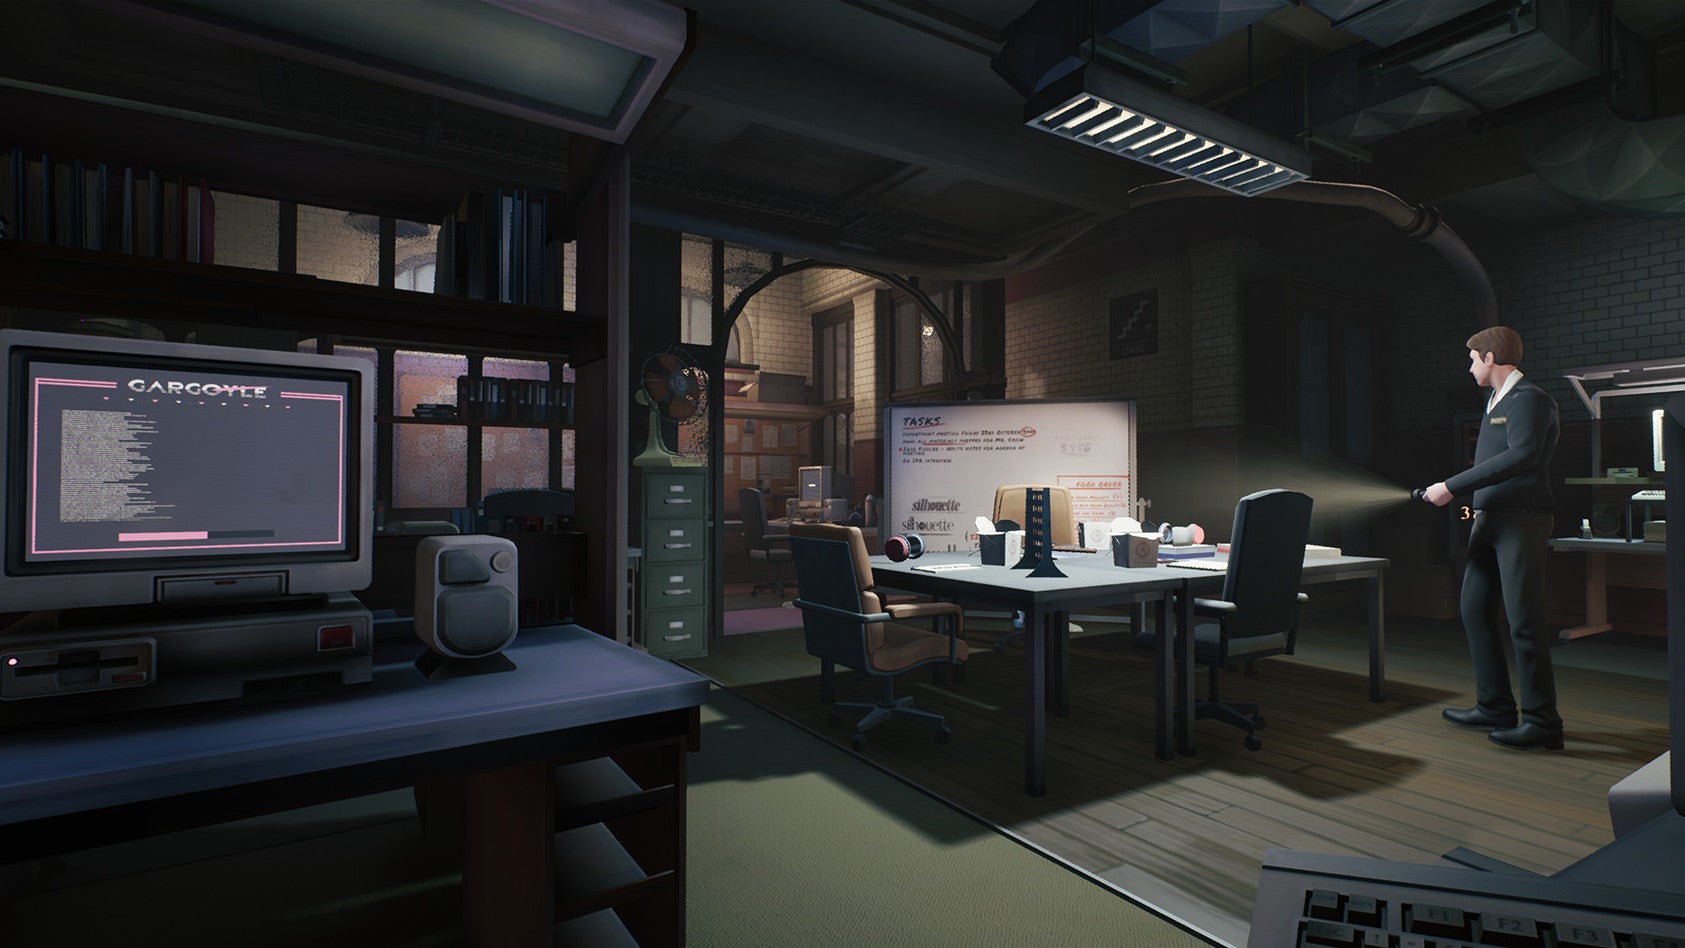 Hiding from an office security guard in a The Occupation screenshot.